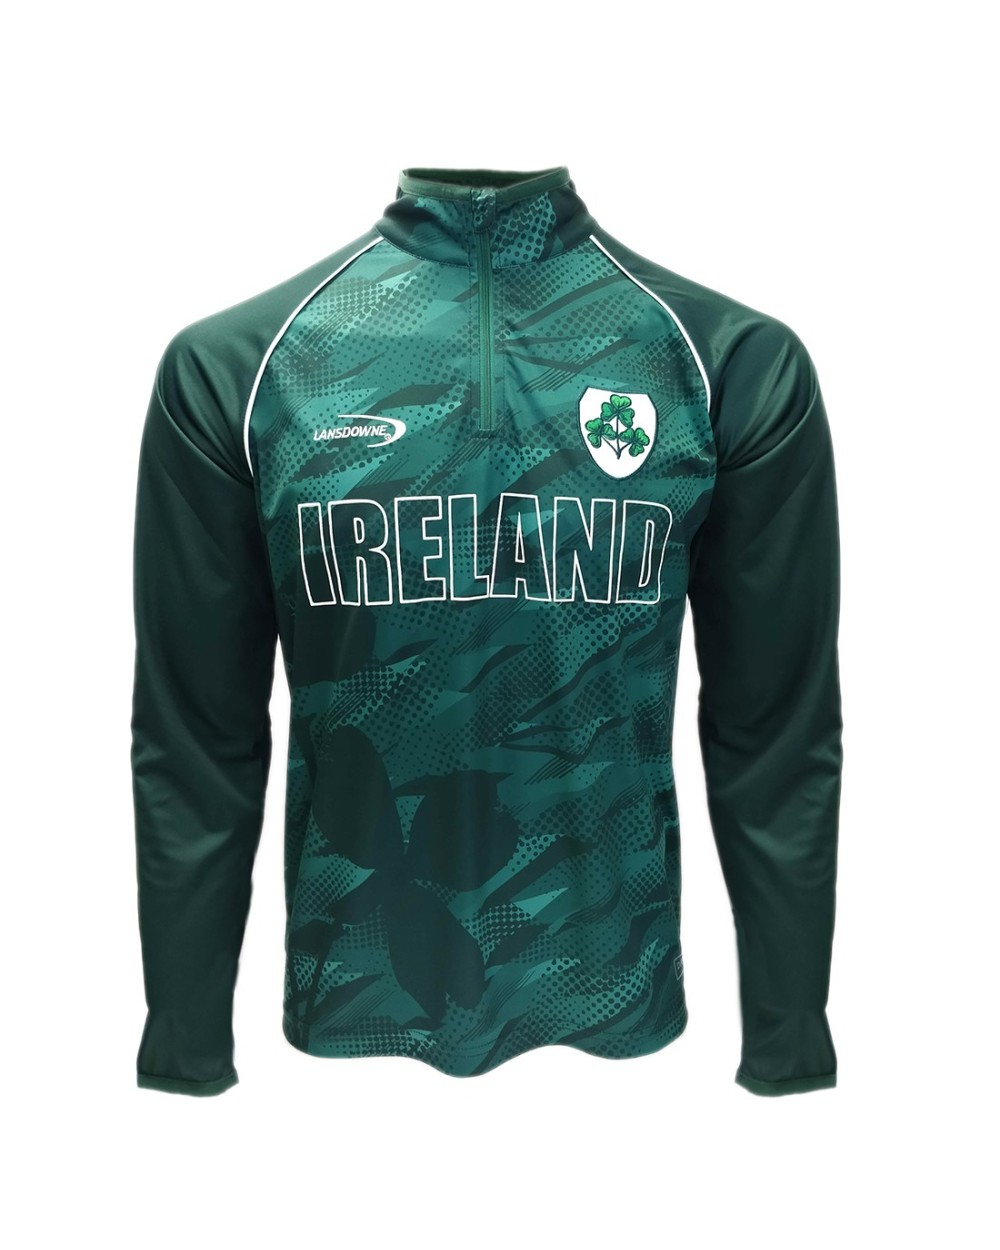 Lansdowne Adults Bottle Green Sublimated Performance 1/4 Zip Top